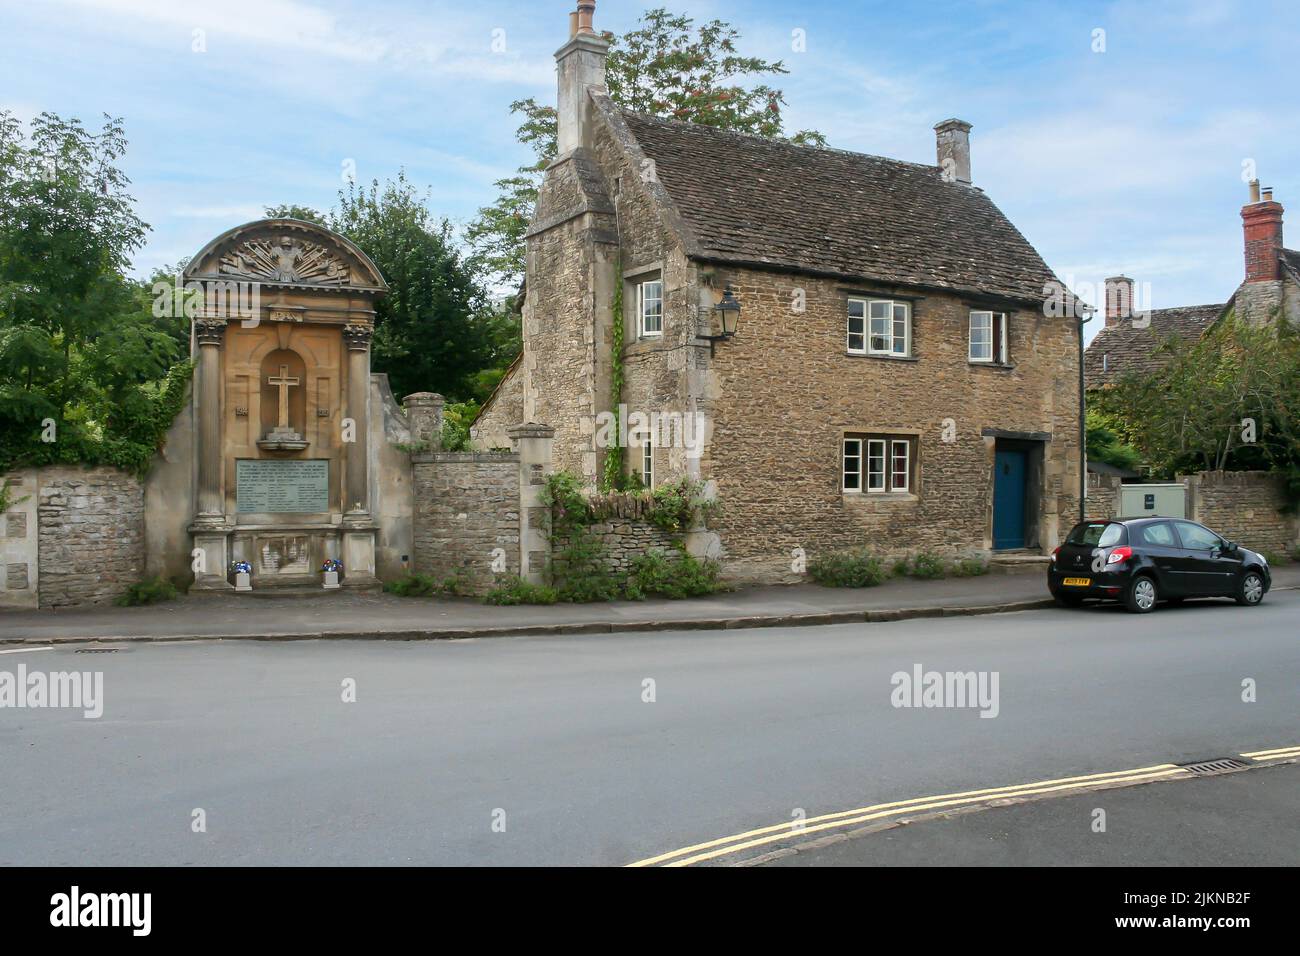 An old rustic house in Lacock Village, Wiltshire county, England Stock Photo